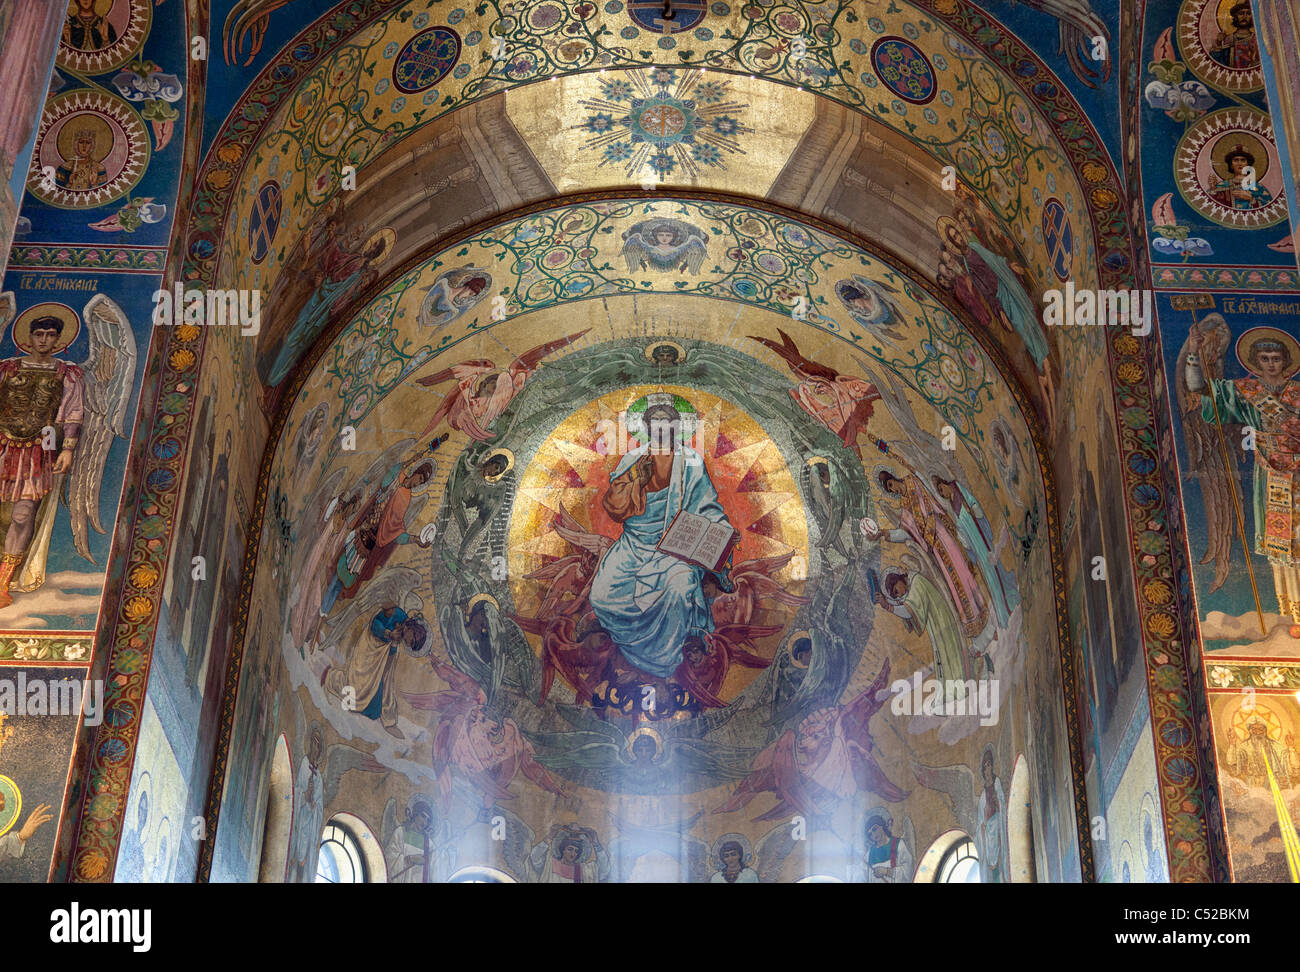 Church of the spilt blood, St Petersburg Russia - interior 10 Stock Photo